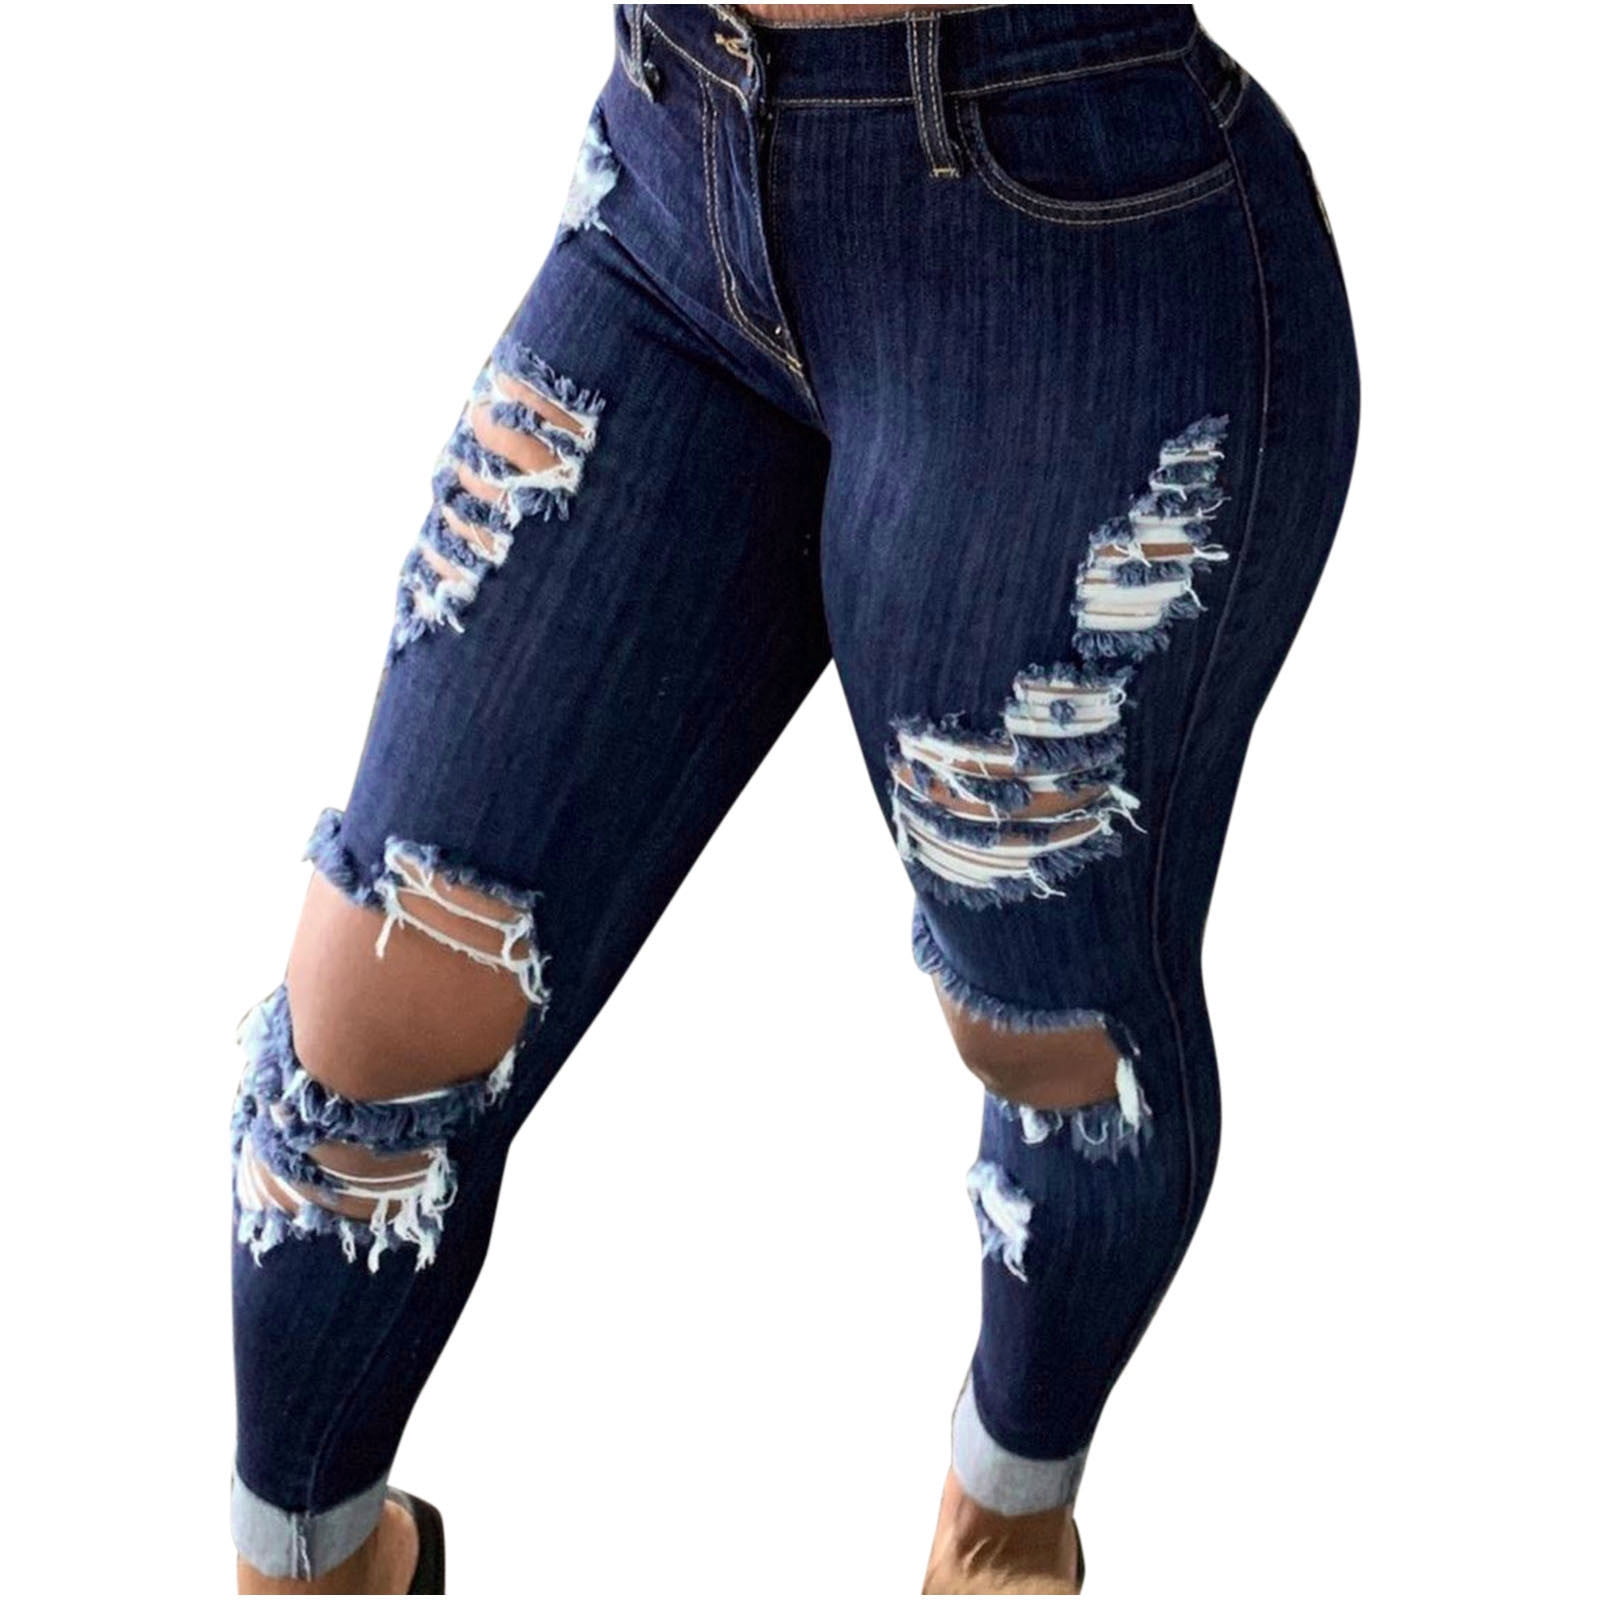 Bigersell Pull on Jeans for Women Stretch Full Length Pants Jeans Women's  Pants Street Fashion Jeans Wash Holes Show Thin Casual Trousers Pants